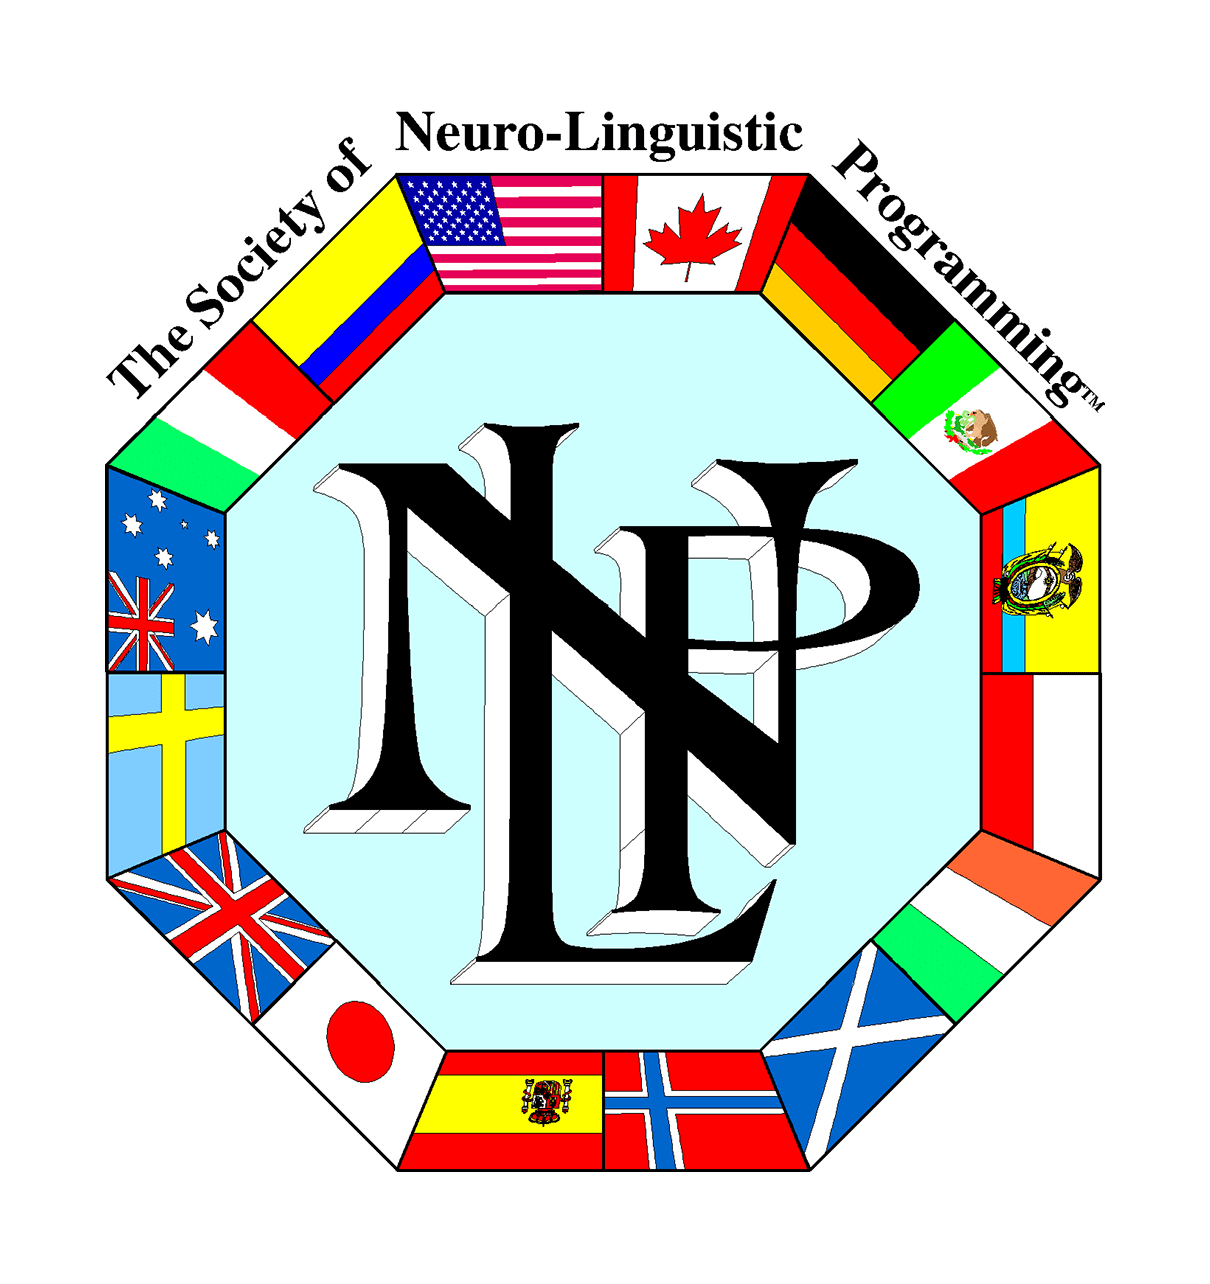 The Society of Neuro-Linguistic Programming (NLP) logo